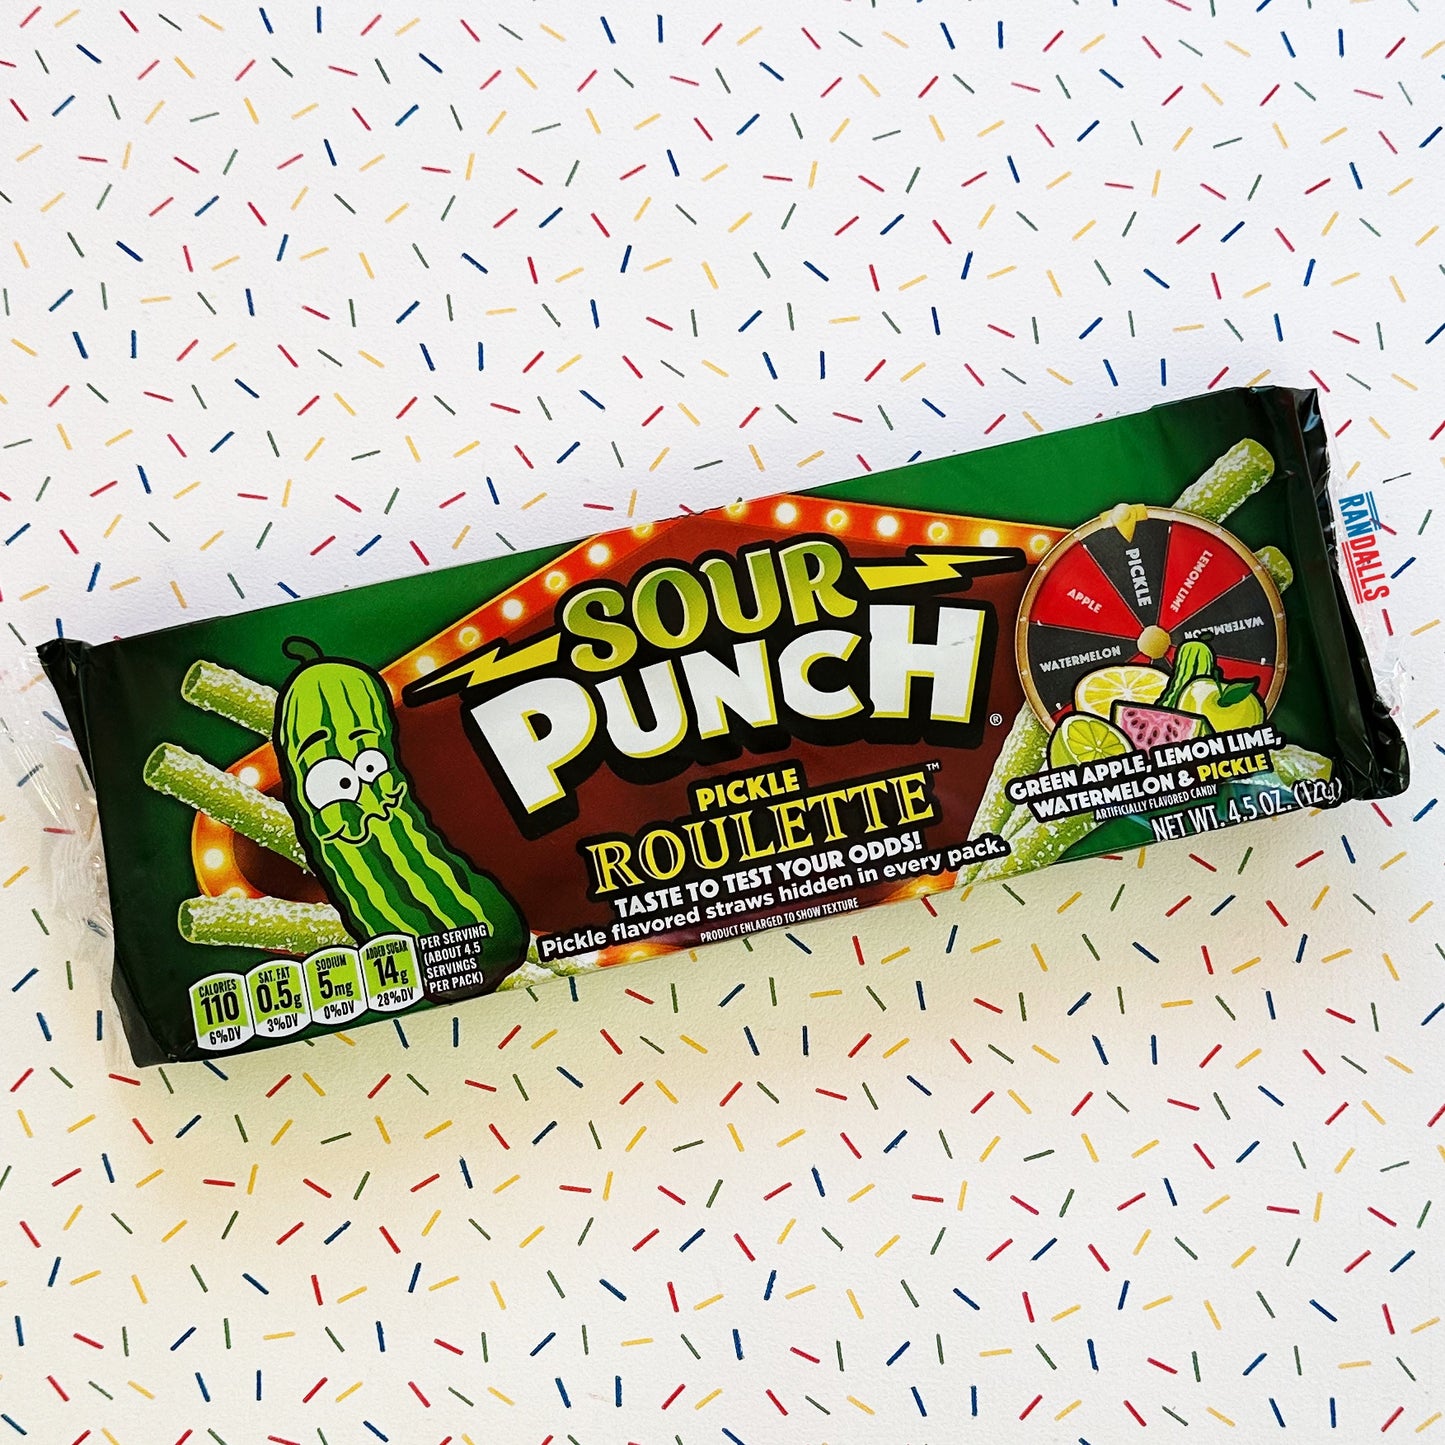 sourpunch, sour punch, sour punch pickle roulette, pickle, mystery, pickles, america, usa, randalls, randallsuk